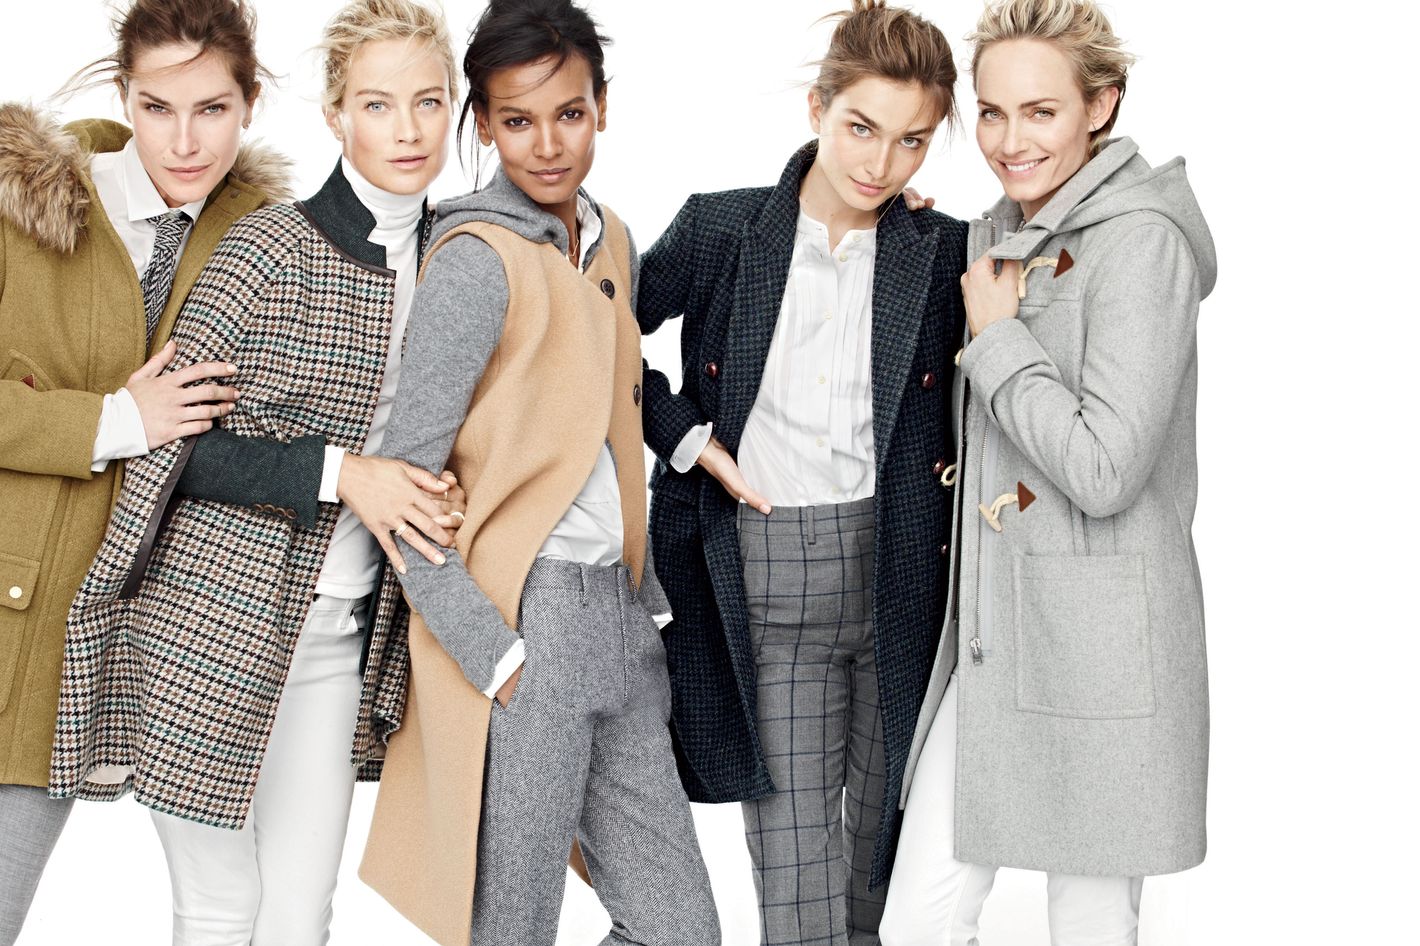 Meet the Real People Modeling for J. Crew